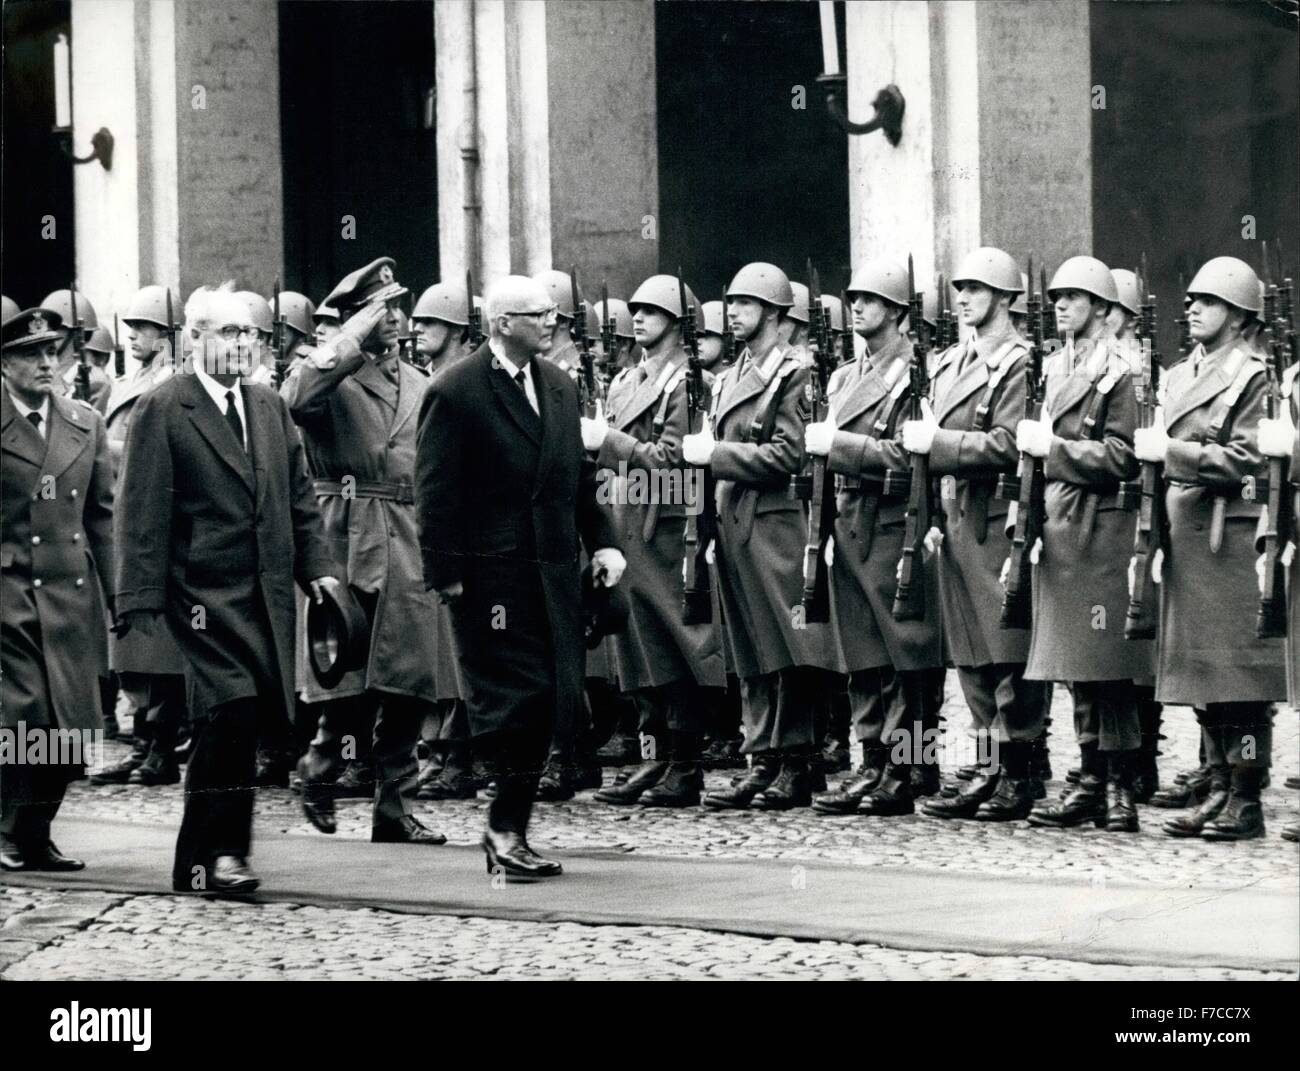 1979 - Singer Uhro Kekkonen President of the Republic of Finland, is in Rome for a three days official visit. Picture Shows: President Kekkonen (right) and President Giusep pe Saragth passing in front of the guards. Urho Kekkonen © Keystone Pictures USA/ZUMAPRESS.com/Alamy Live News Stock Photo